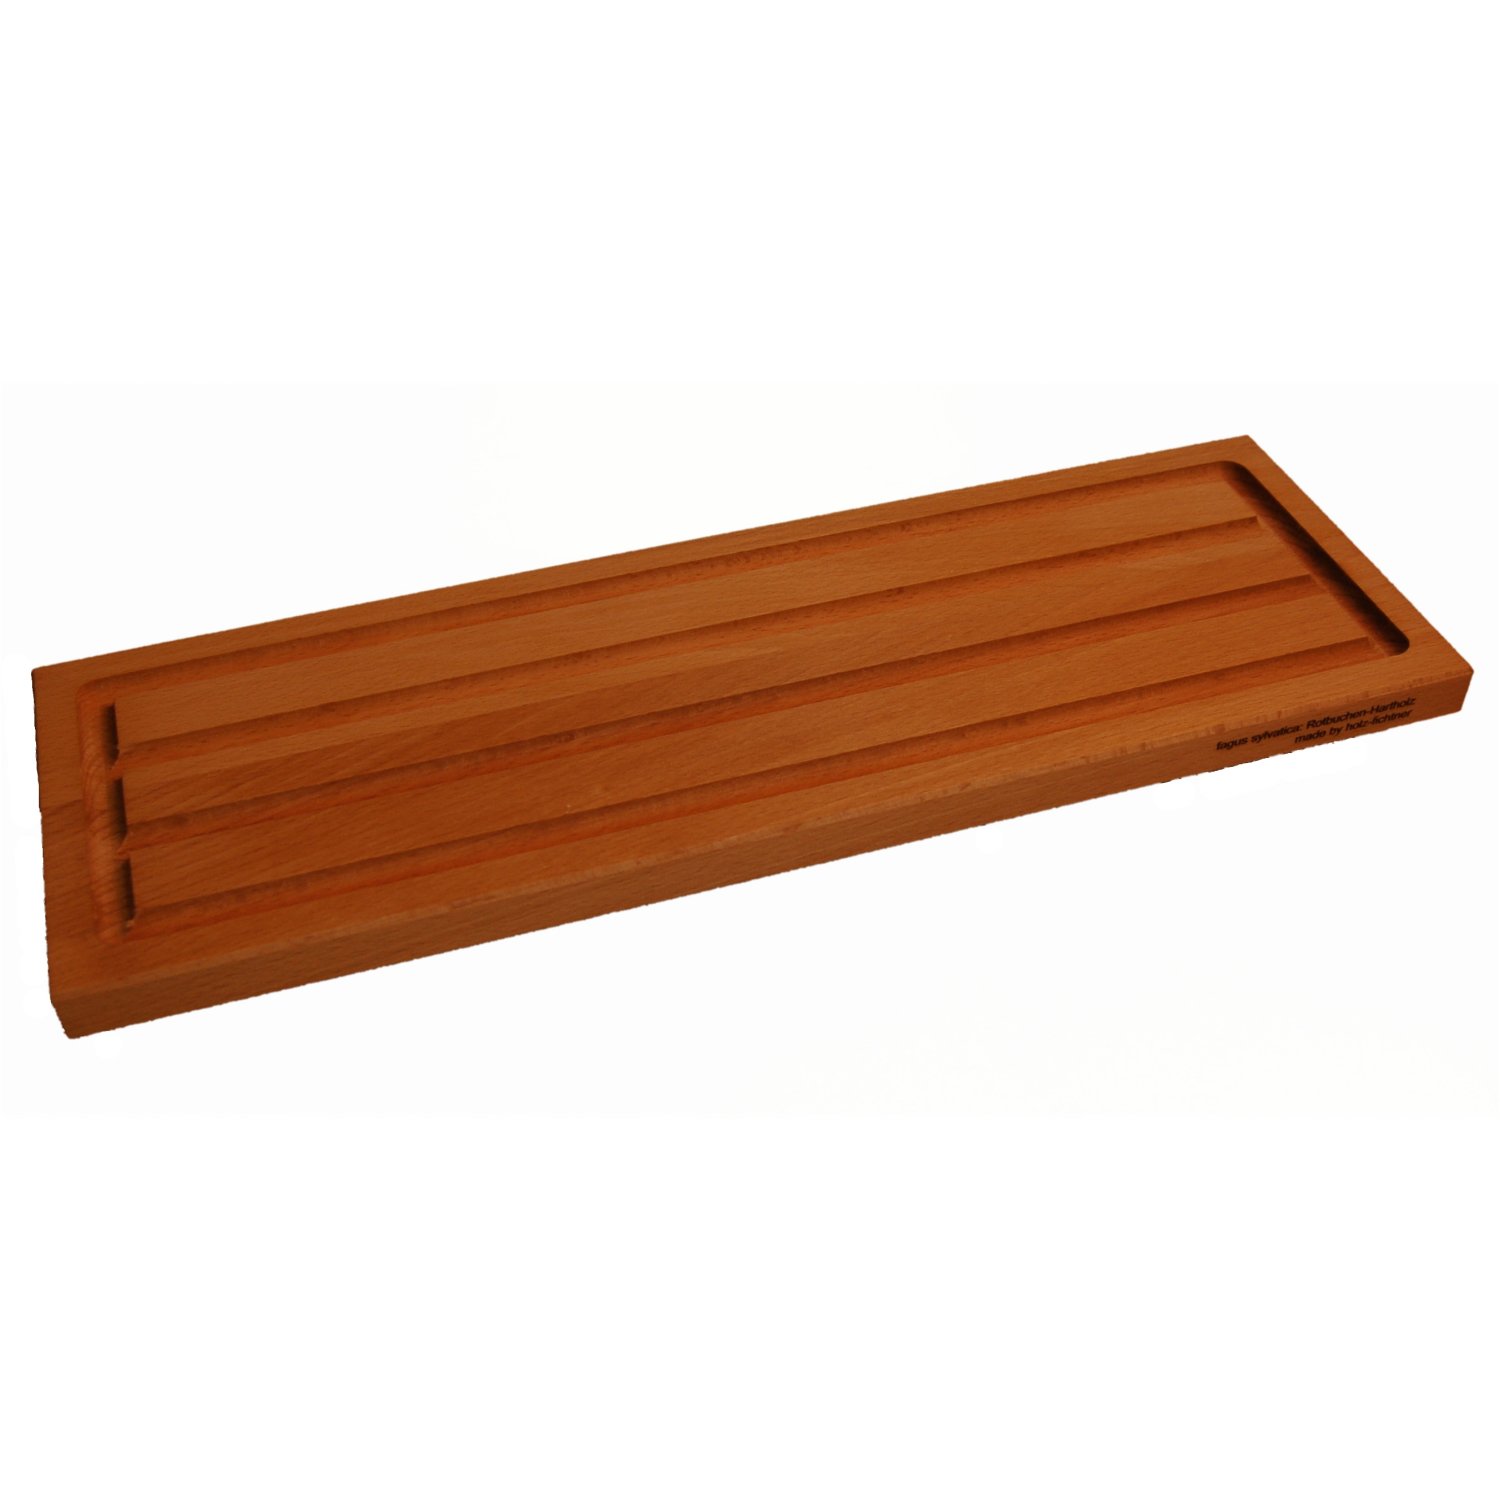 high quality beech wood cutting board for baguette